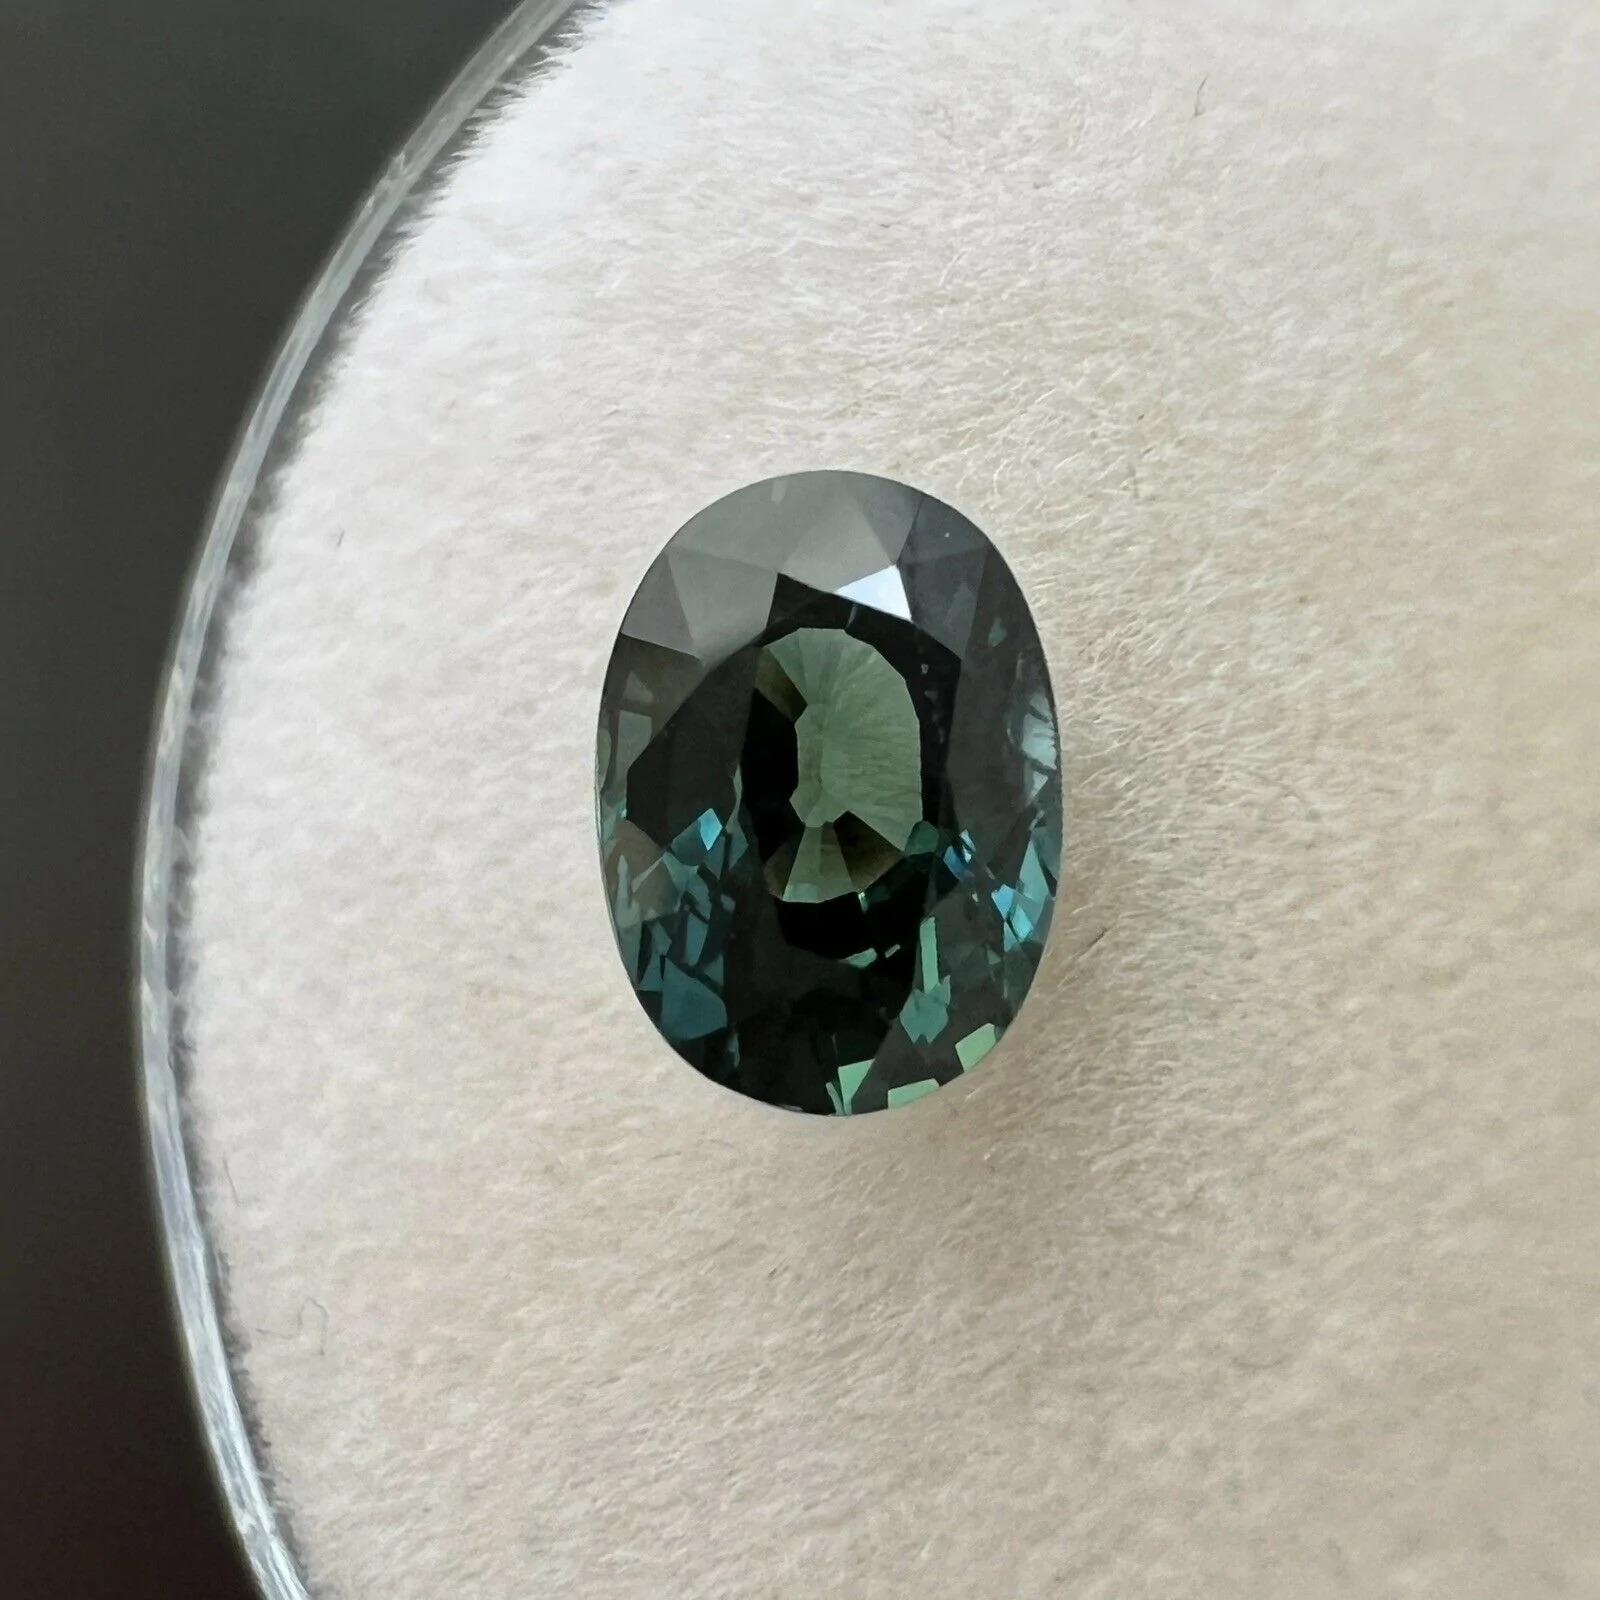 1.00ct Sapphire GIA Certified Untreated Vivid Green Blue Oval Cut Unheated Rare

GIA Certified Fine Vivid Green Blue Untreated Sapphire Gemstone.
Fully certified by GIA confirming stone as natural and untreated. Very rare for natural sapphires. 1.00